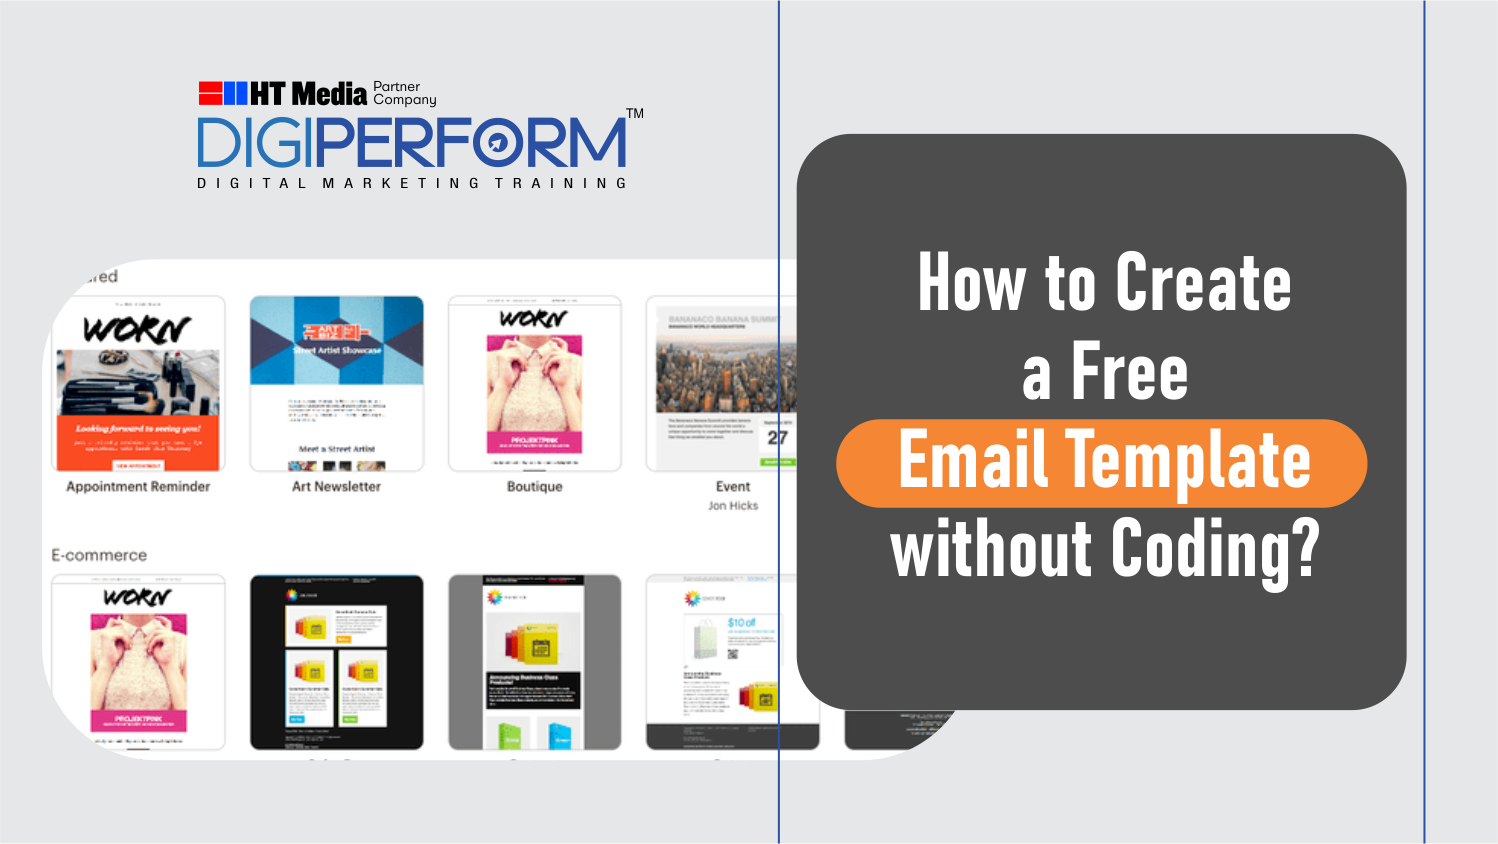 Chapter 3 – how to create a free email template without coding?